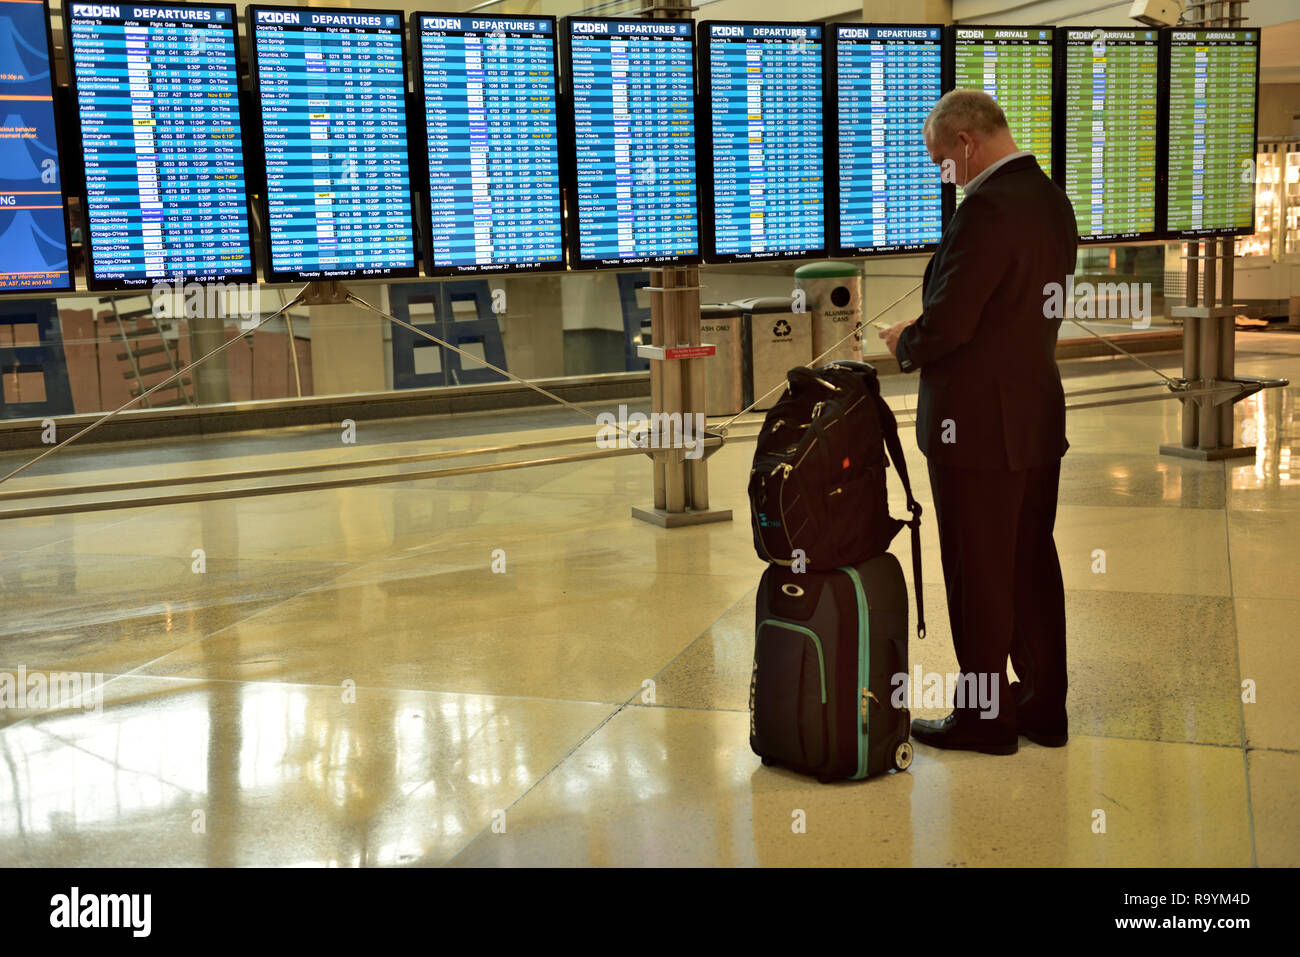 Man with suitcases checking the departure, arrivals board at airport, Denver International Airport (DEN), Colorado, USA Stock Photo